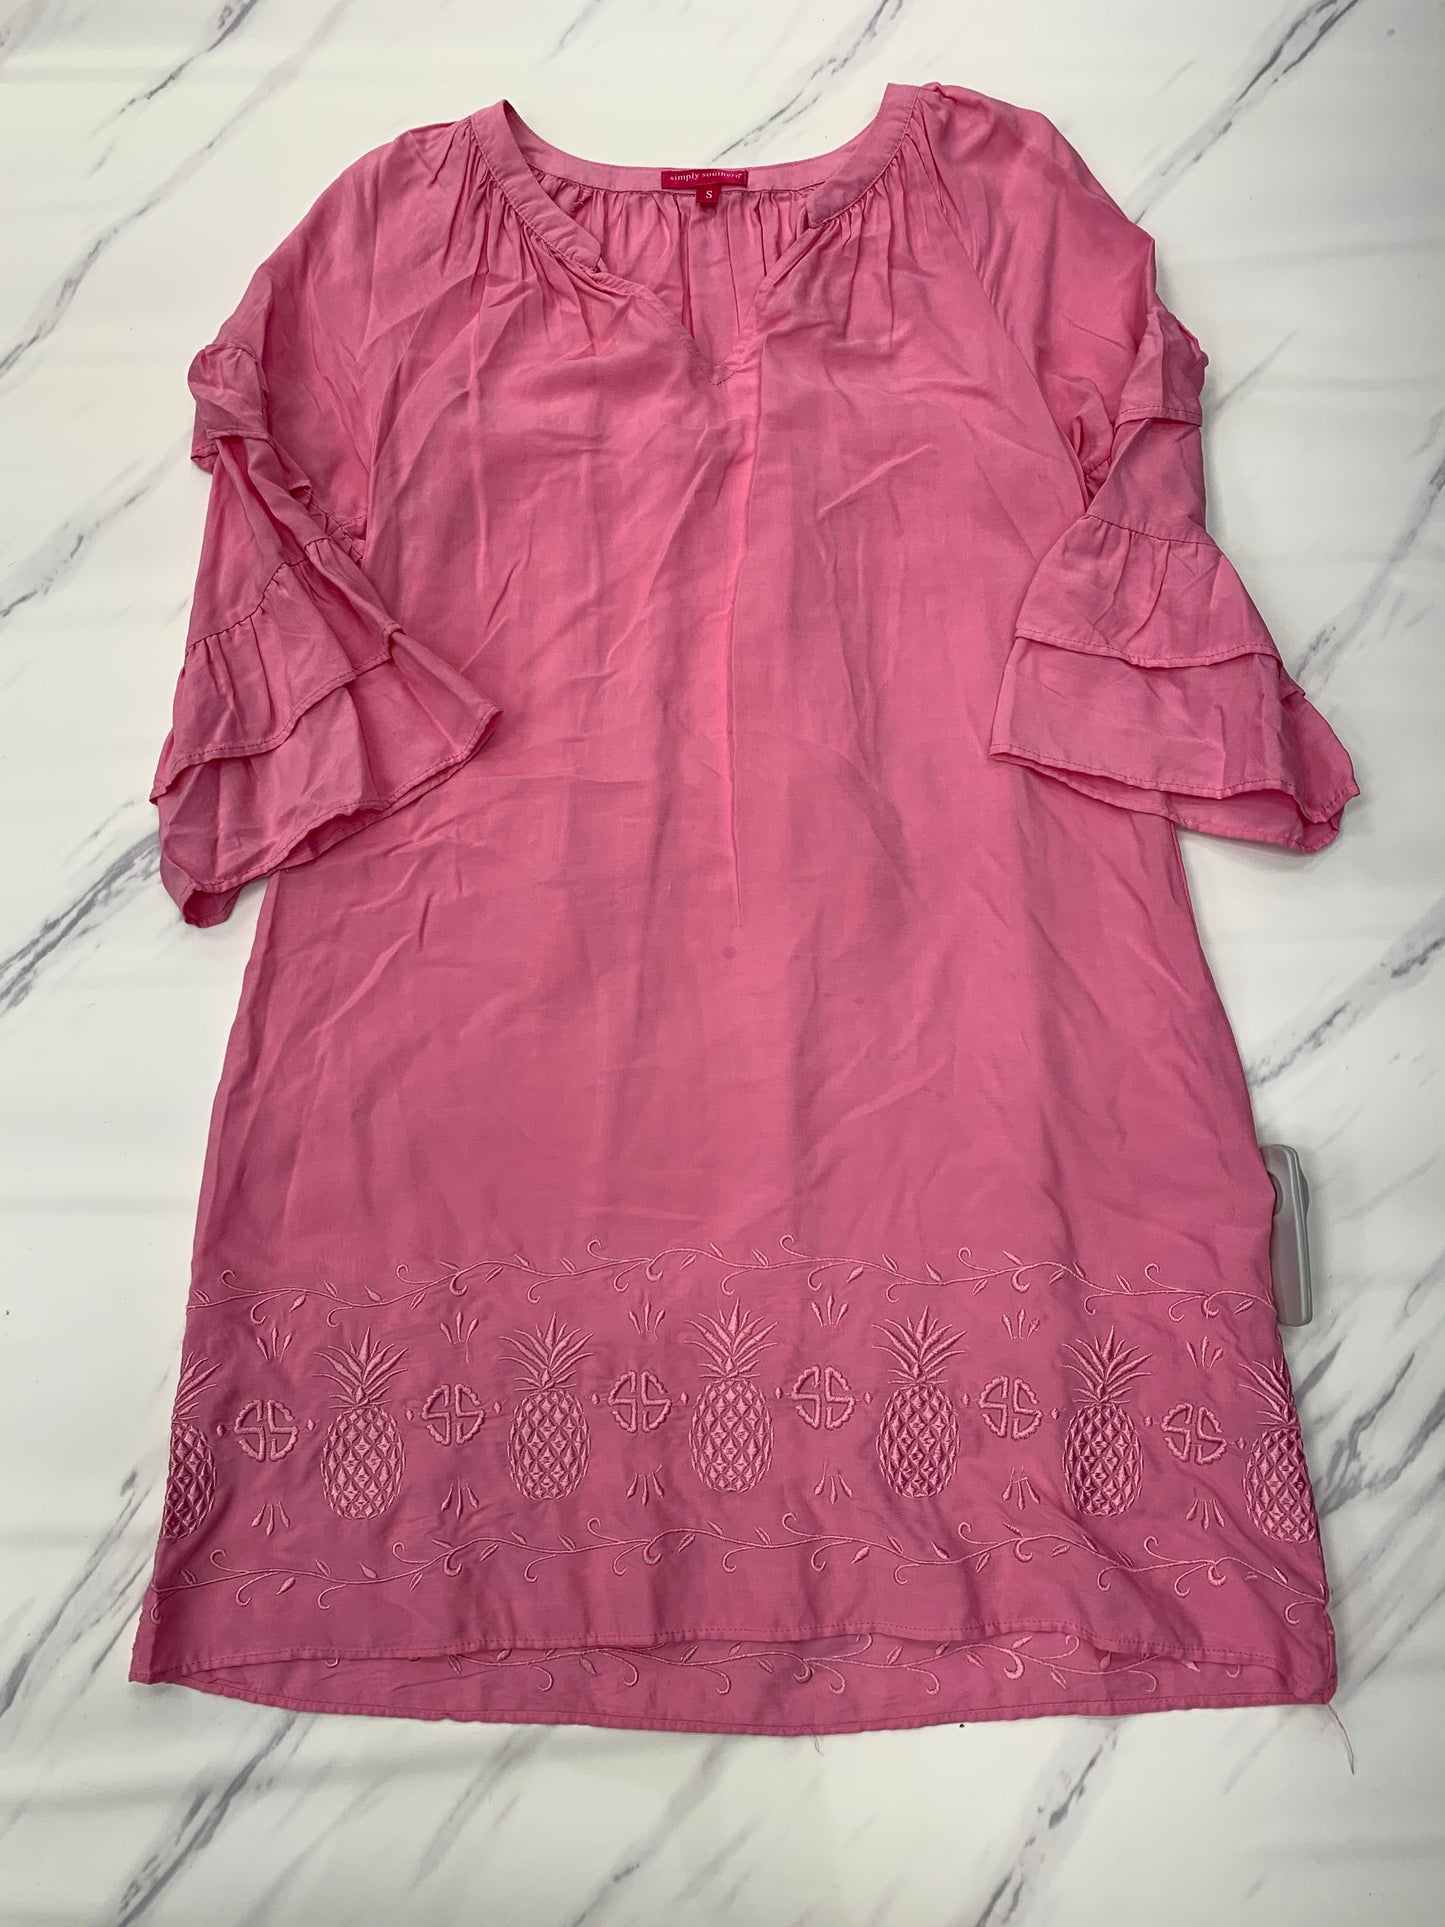 Dress Casual Short Simply Southern, Size S